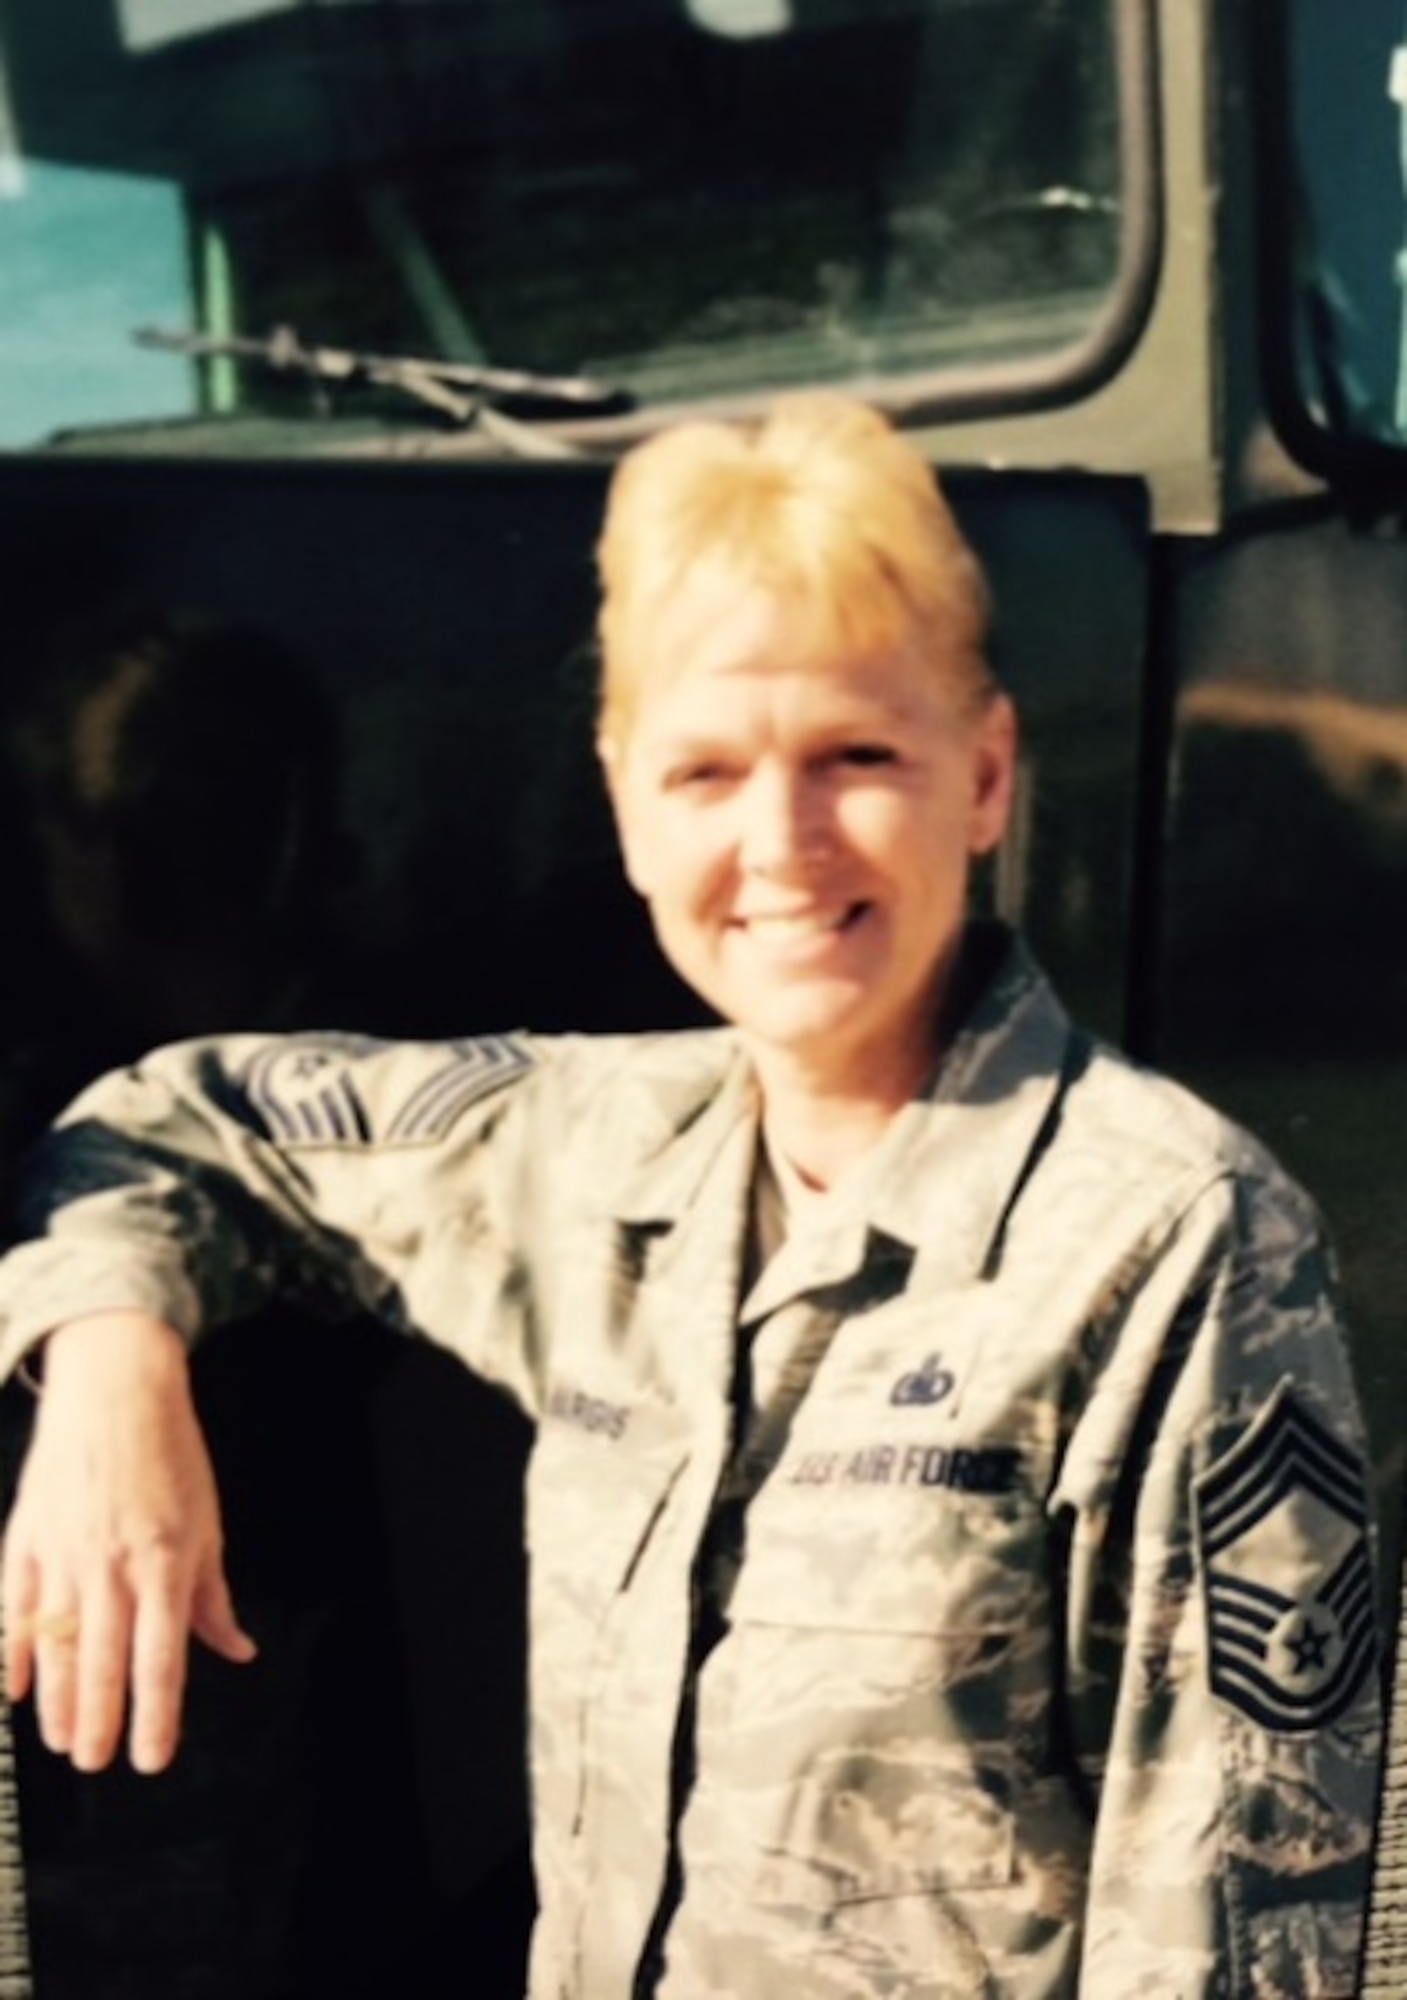 A photo of Ret. Chief Master Sgt. Gail Hargis during her time as an active duty U.S. Air Force Chief Master Sgt.